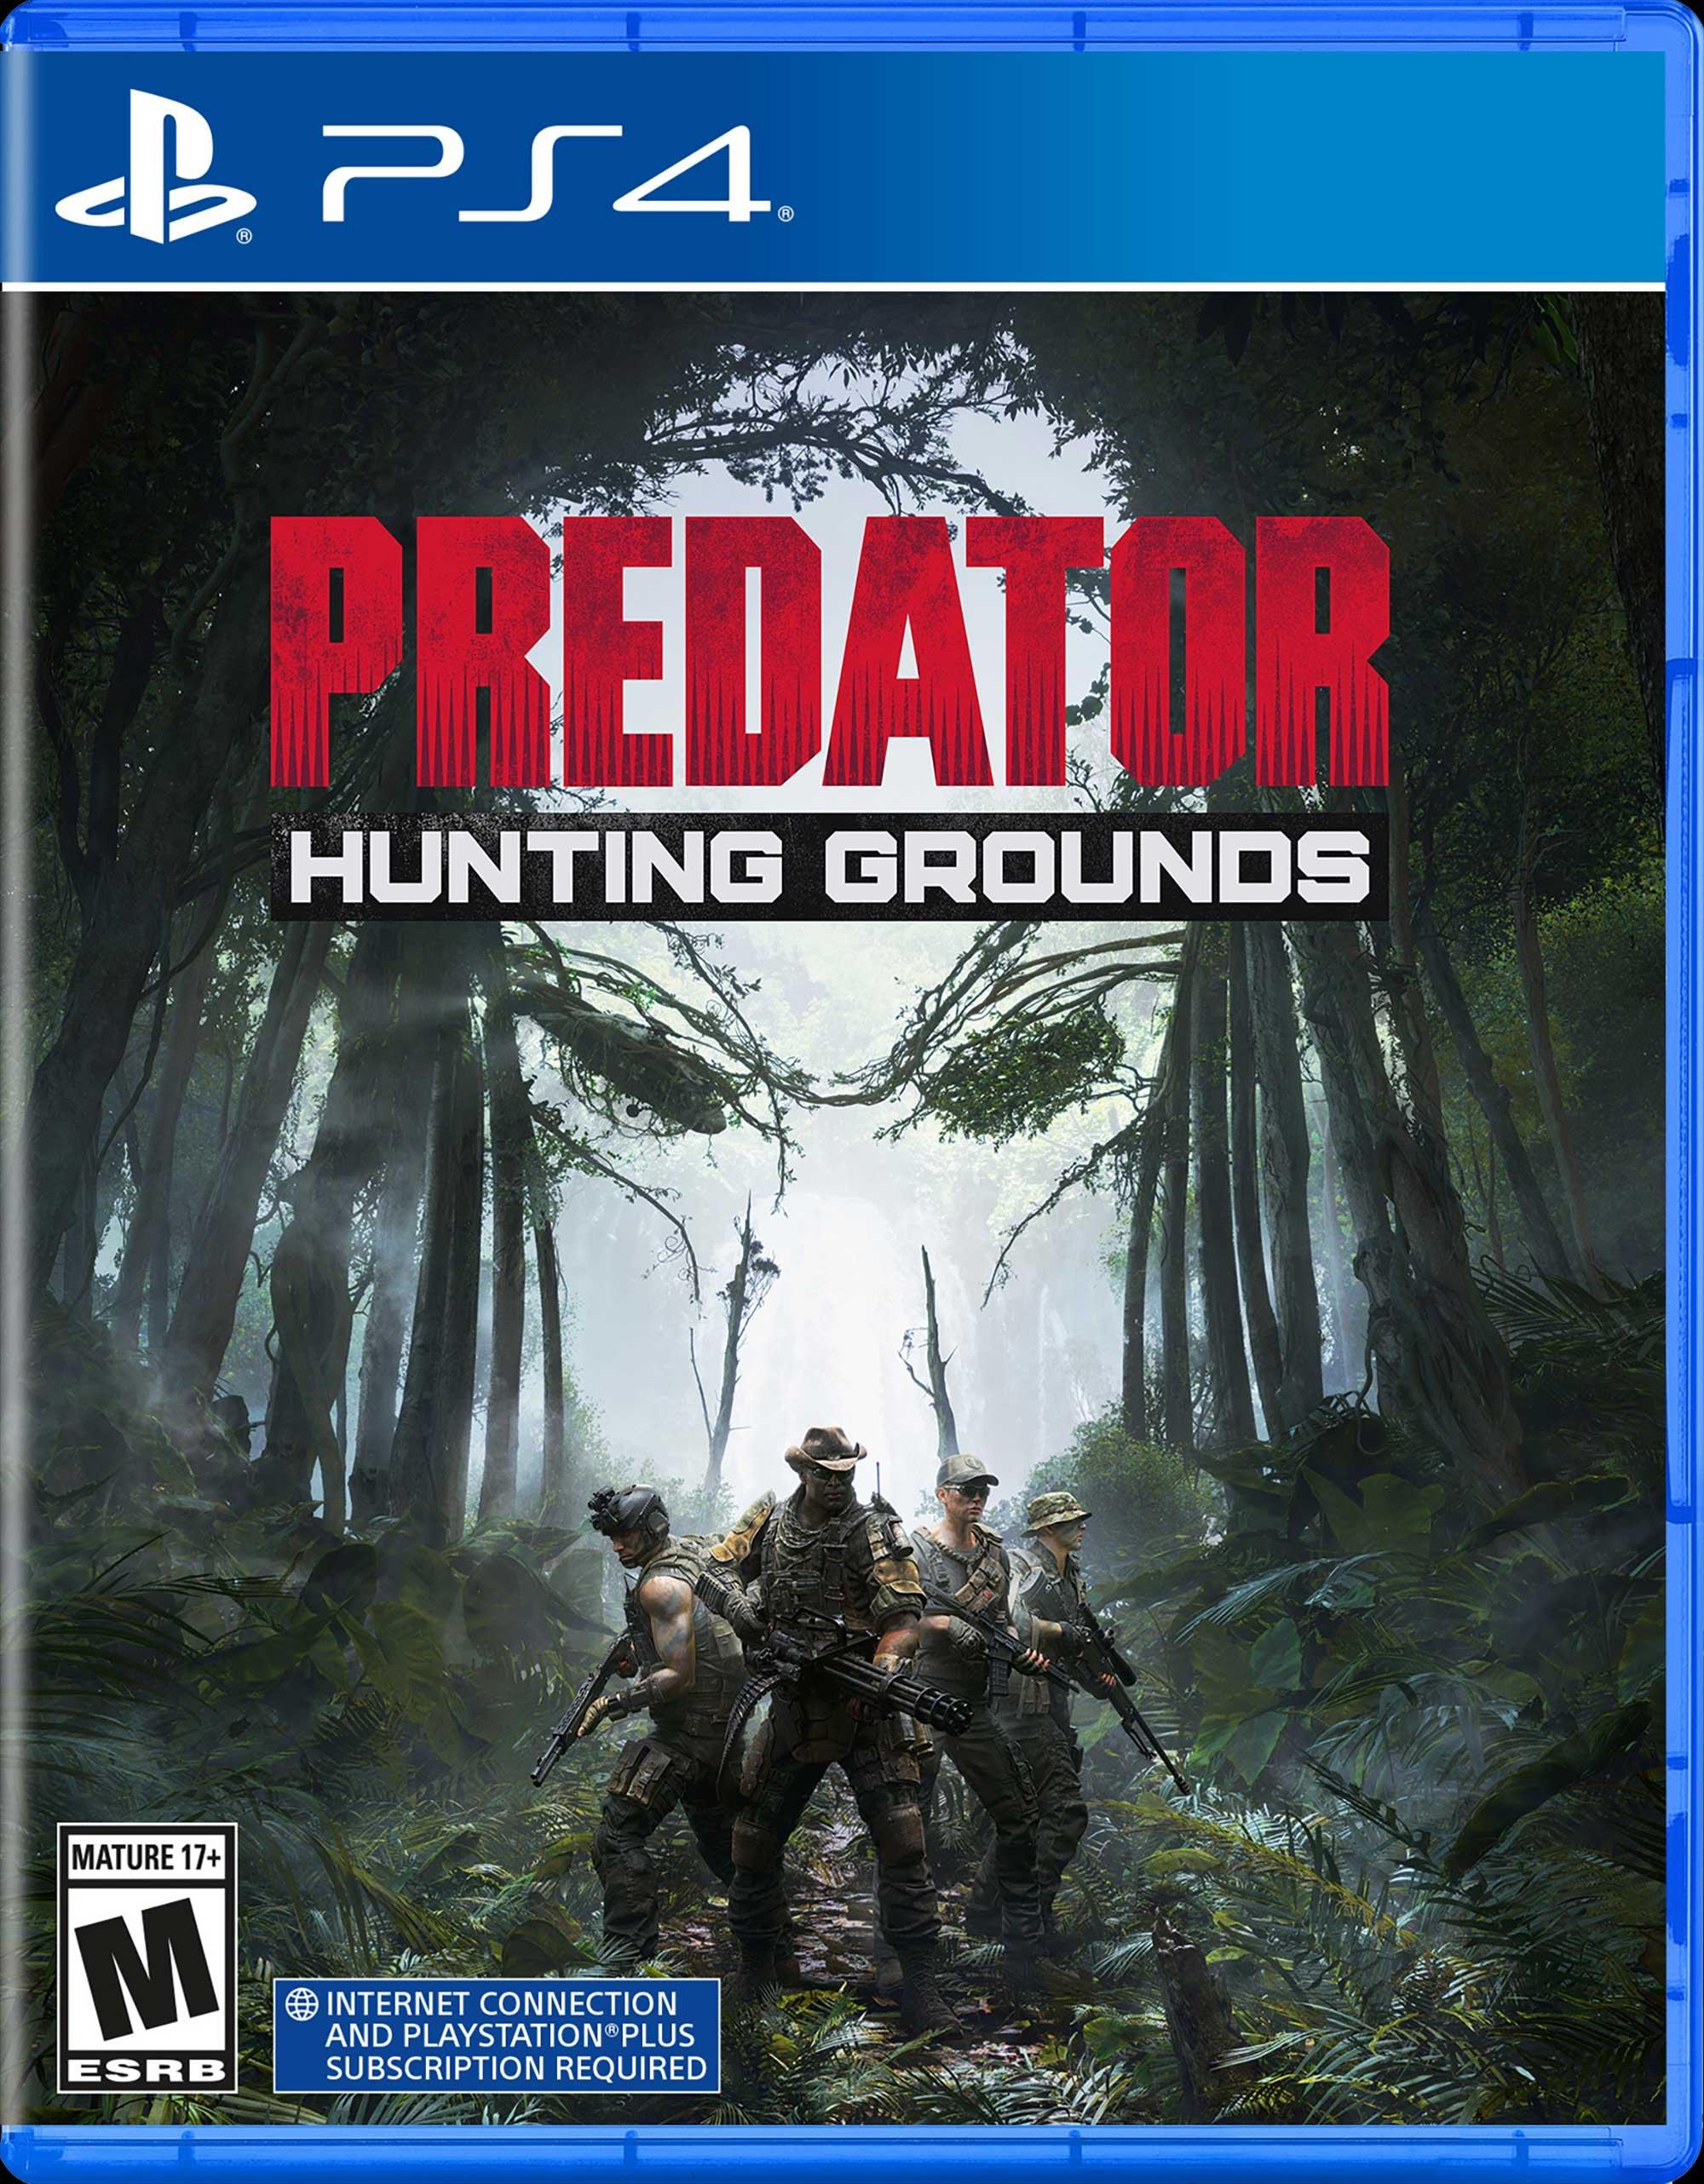 ps4 hunting games